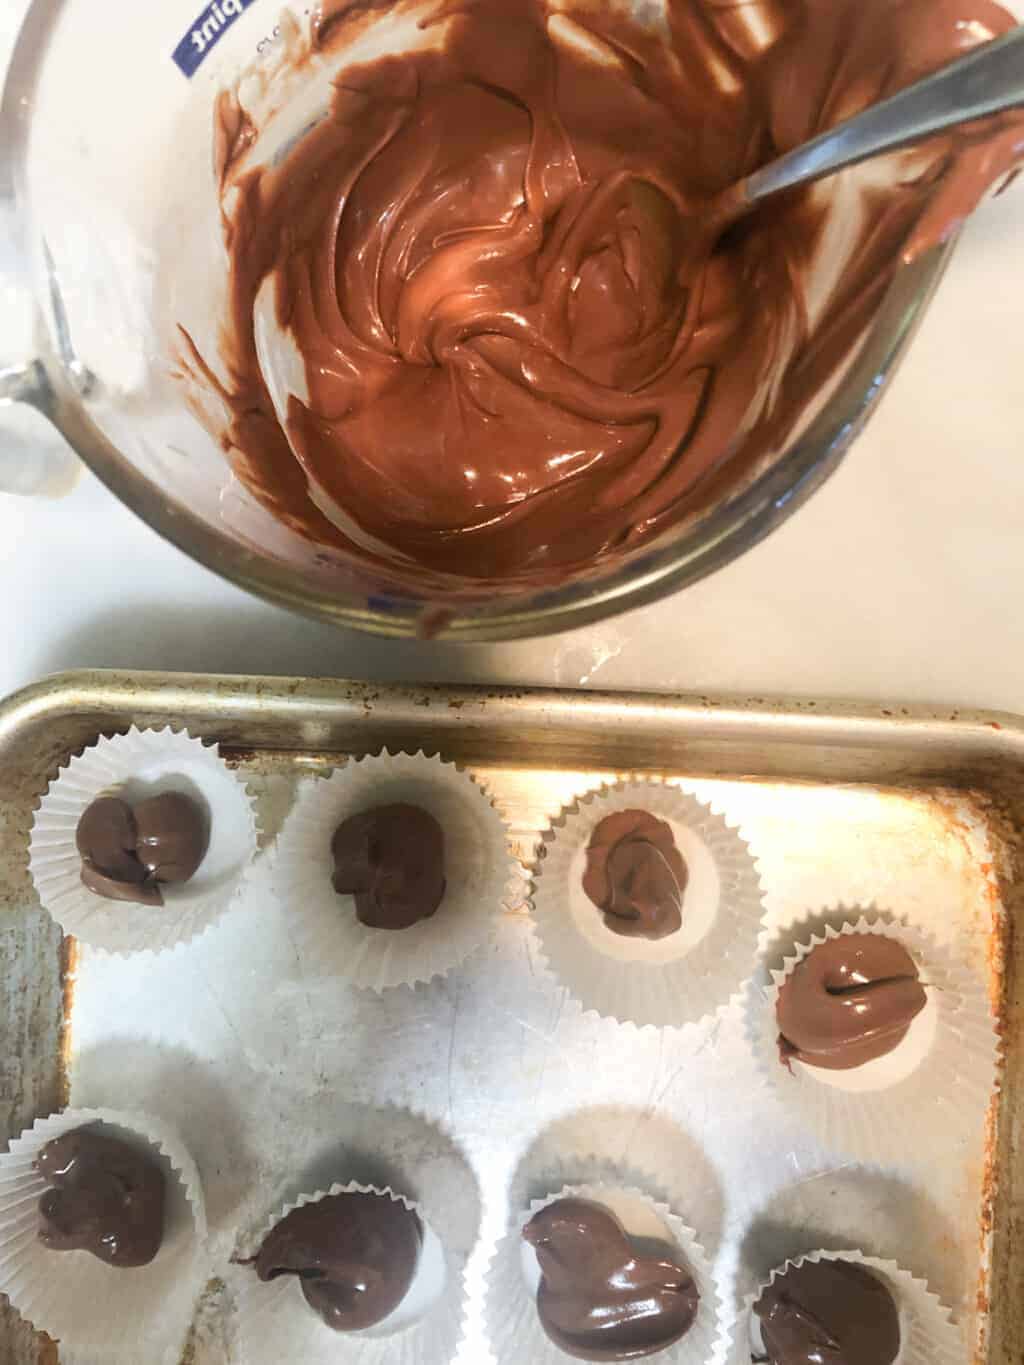 melted chocolate in measuring cup next to baking pan.